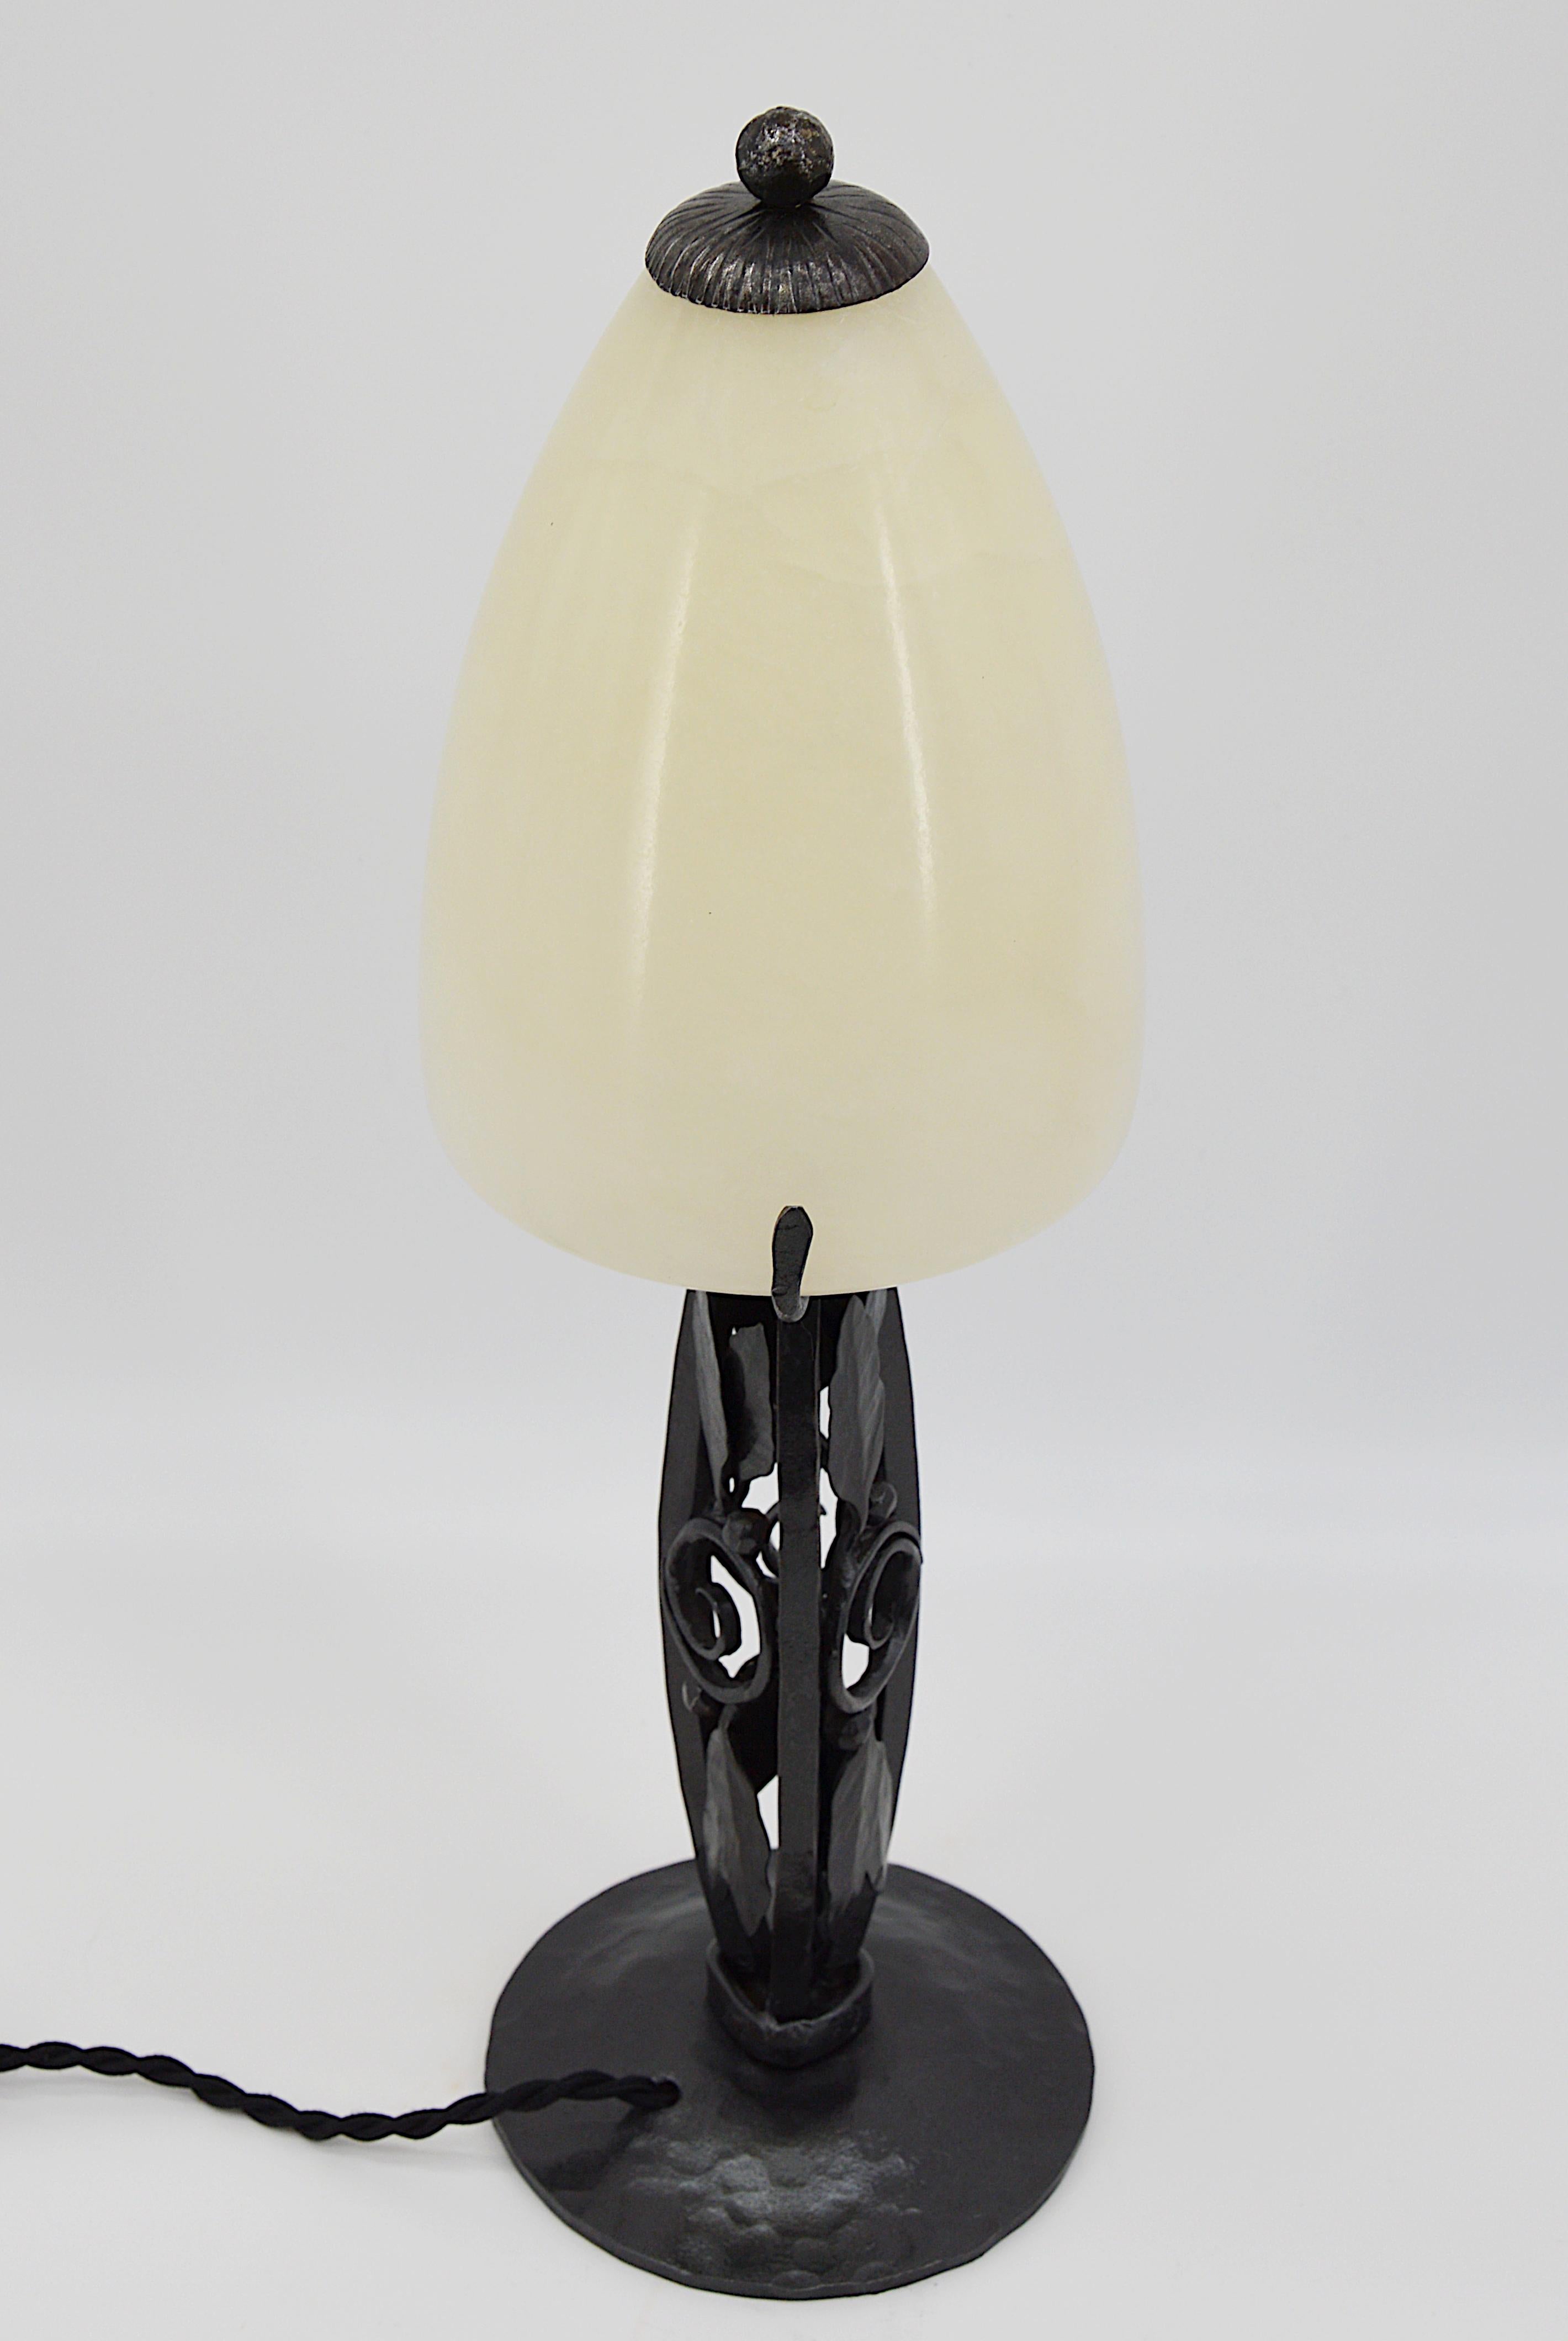 French Art Deco Alabaster Table Lamp, 1920s In Excellent Condition For Sale In Saint-Amans-des-Cots, FR